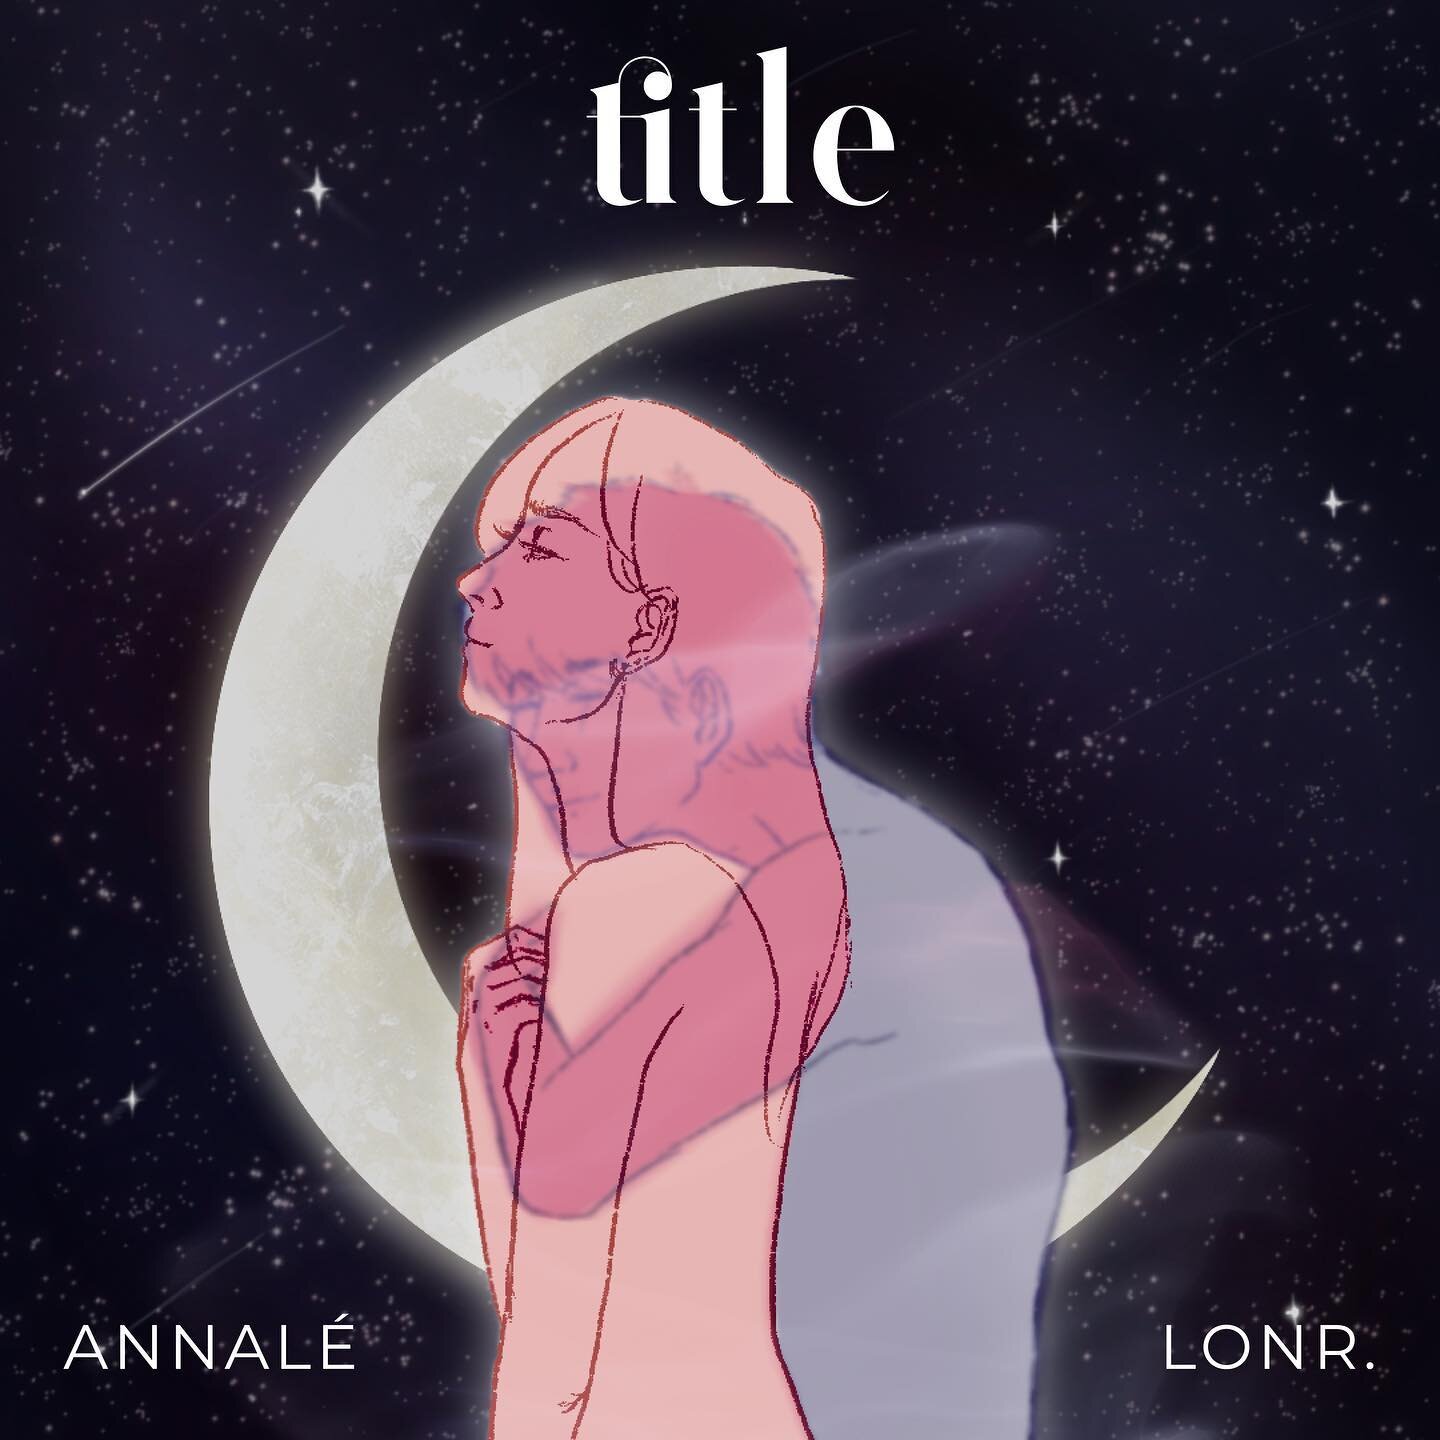 I&rsquo;m so grateful to be a part of this special collaboration with @1lonr 😌💜 Not only do I love how this track turned out, Lonr.&rsquo;s voice took the song to another level! 🙌🏻🙌🏻

#Title by me &amp; Lonr. is out everywhere! 🎧

Hugeeee than